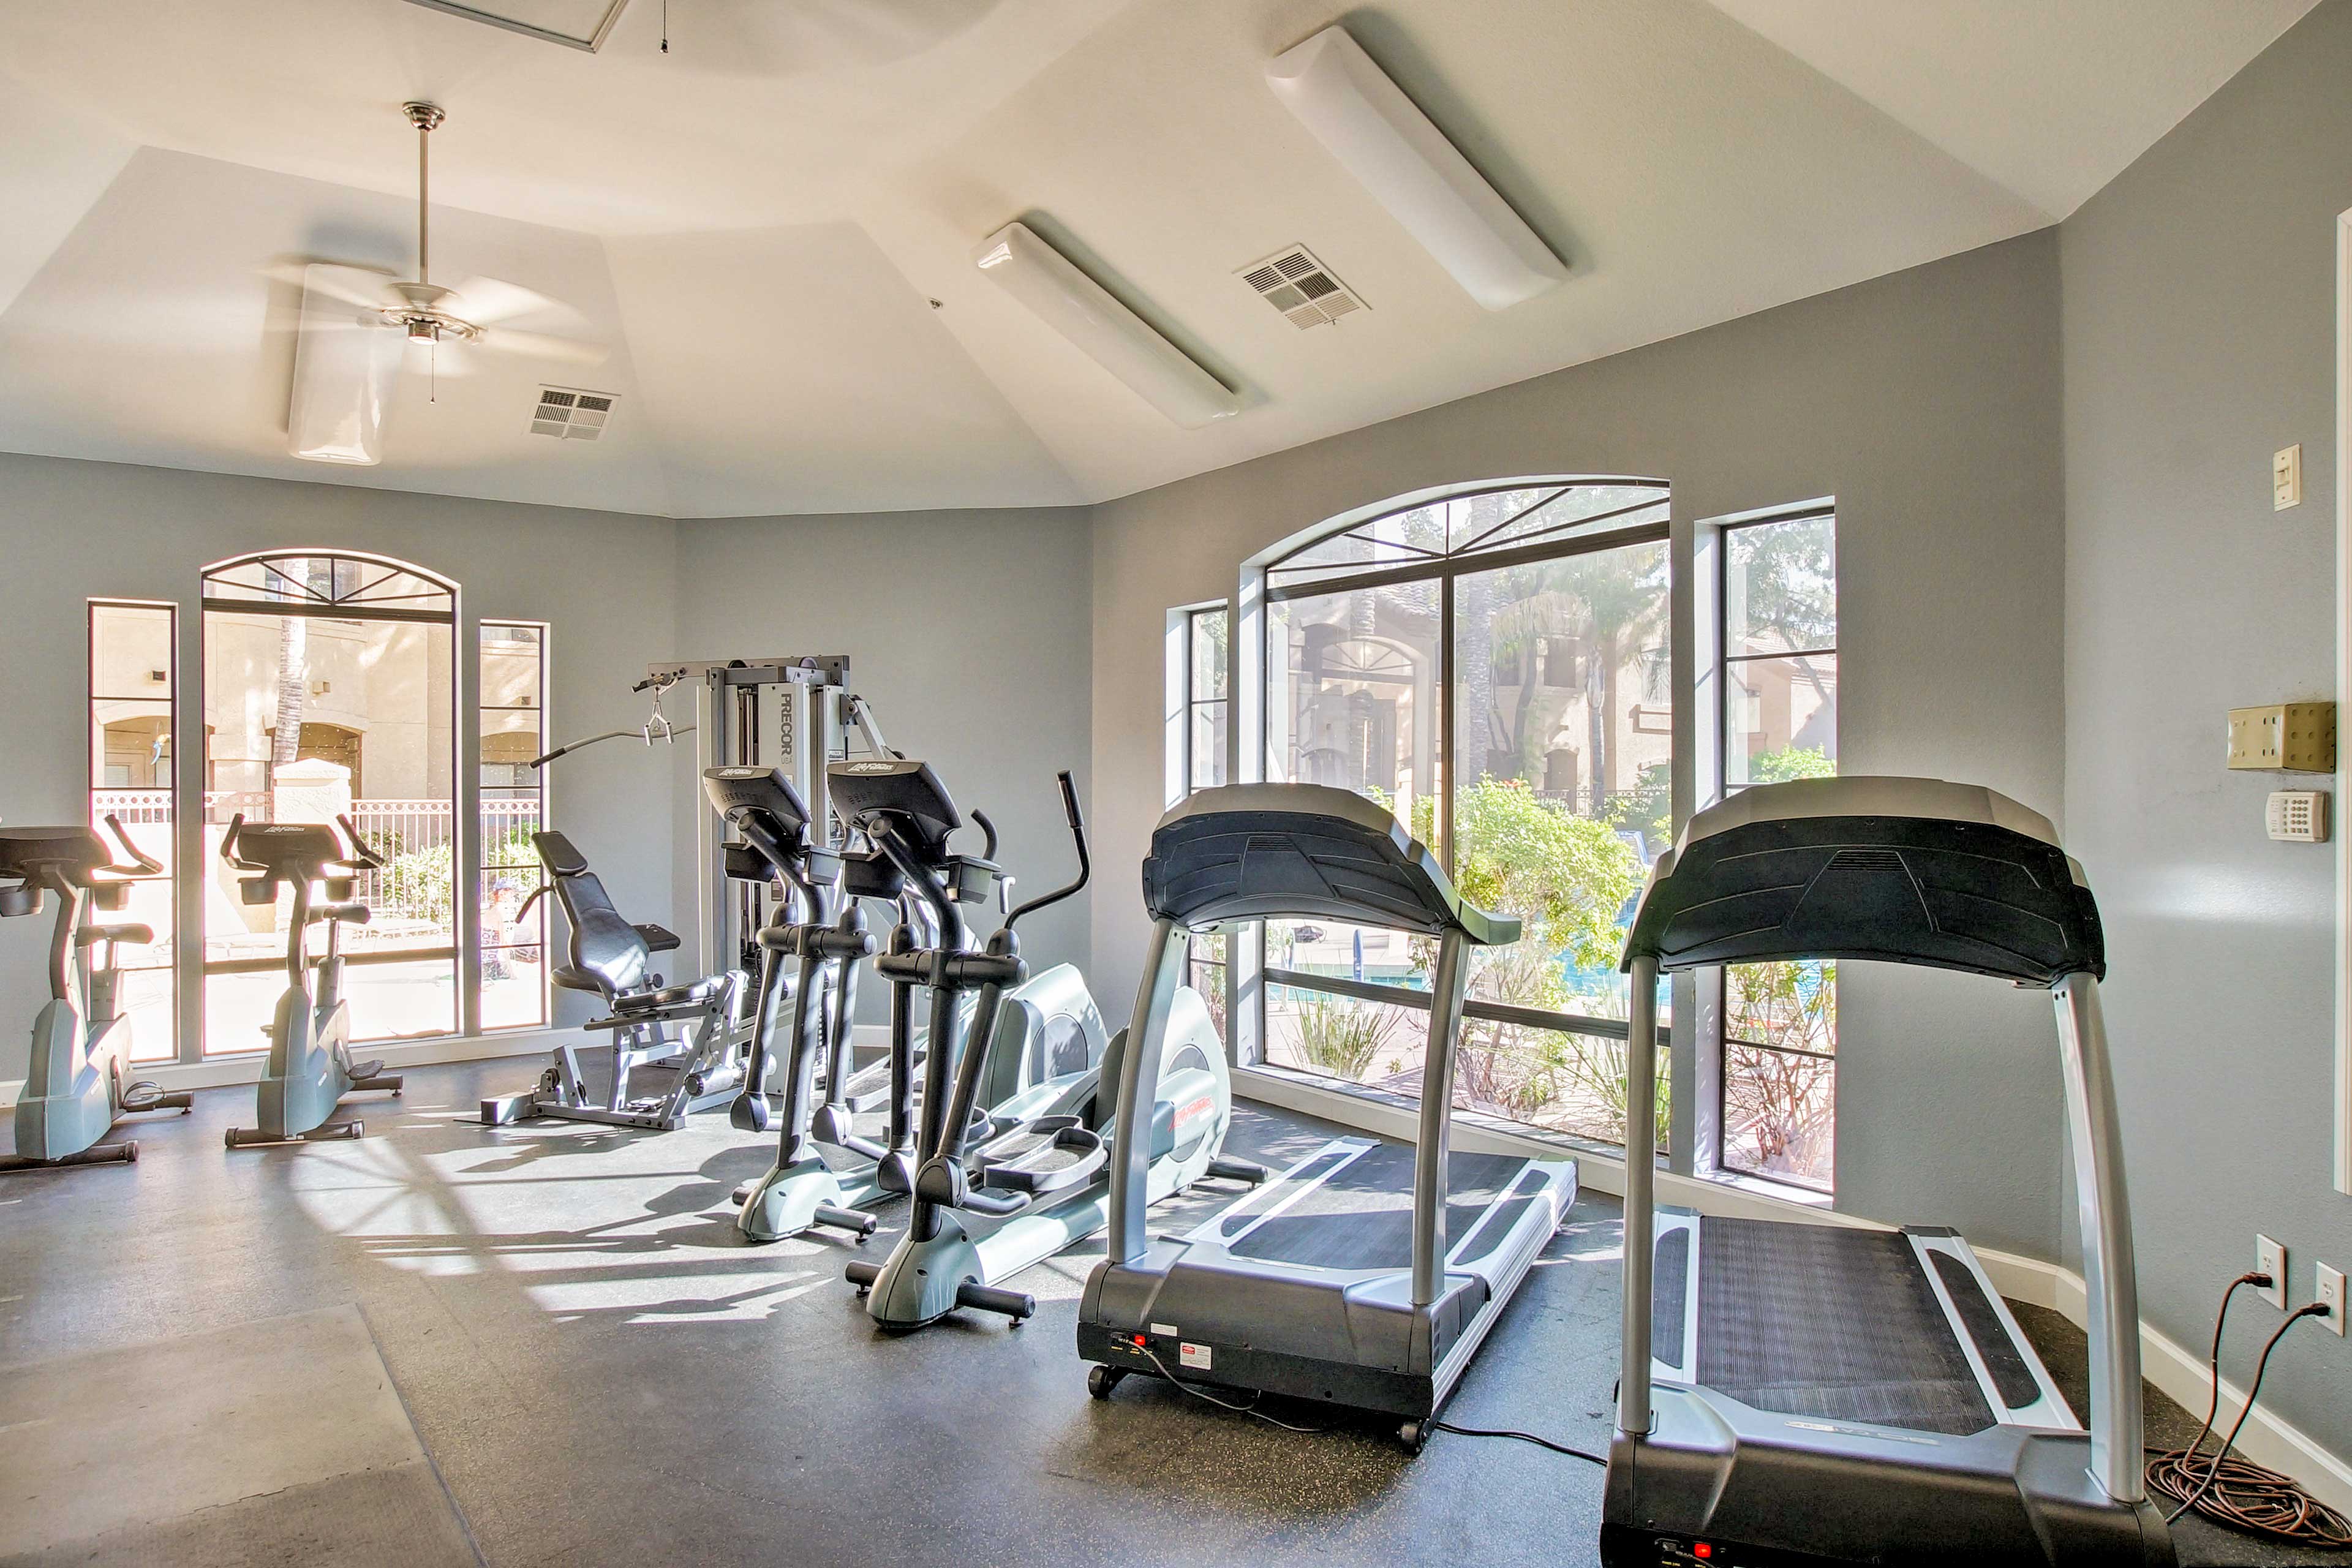 Keep up with your fitness goals in the fitness center.